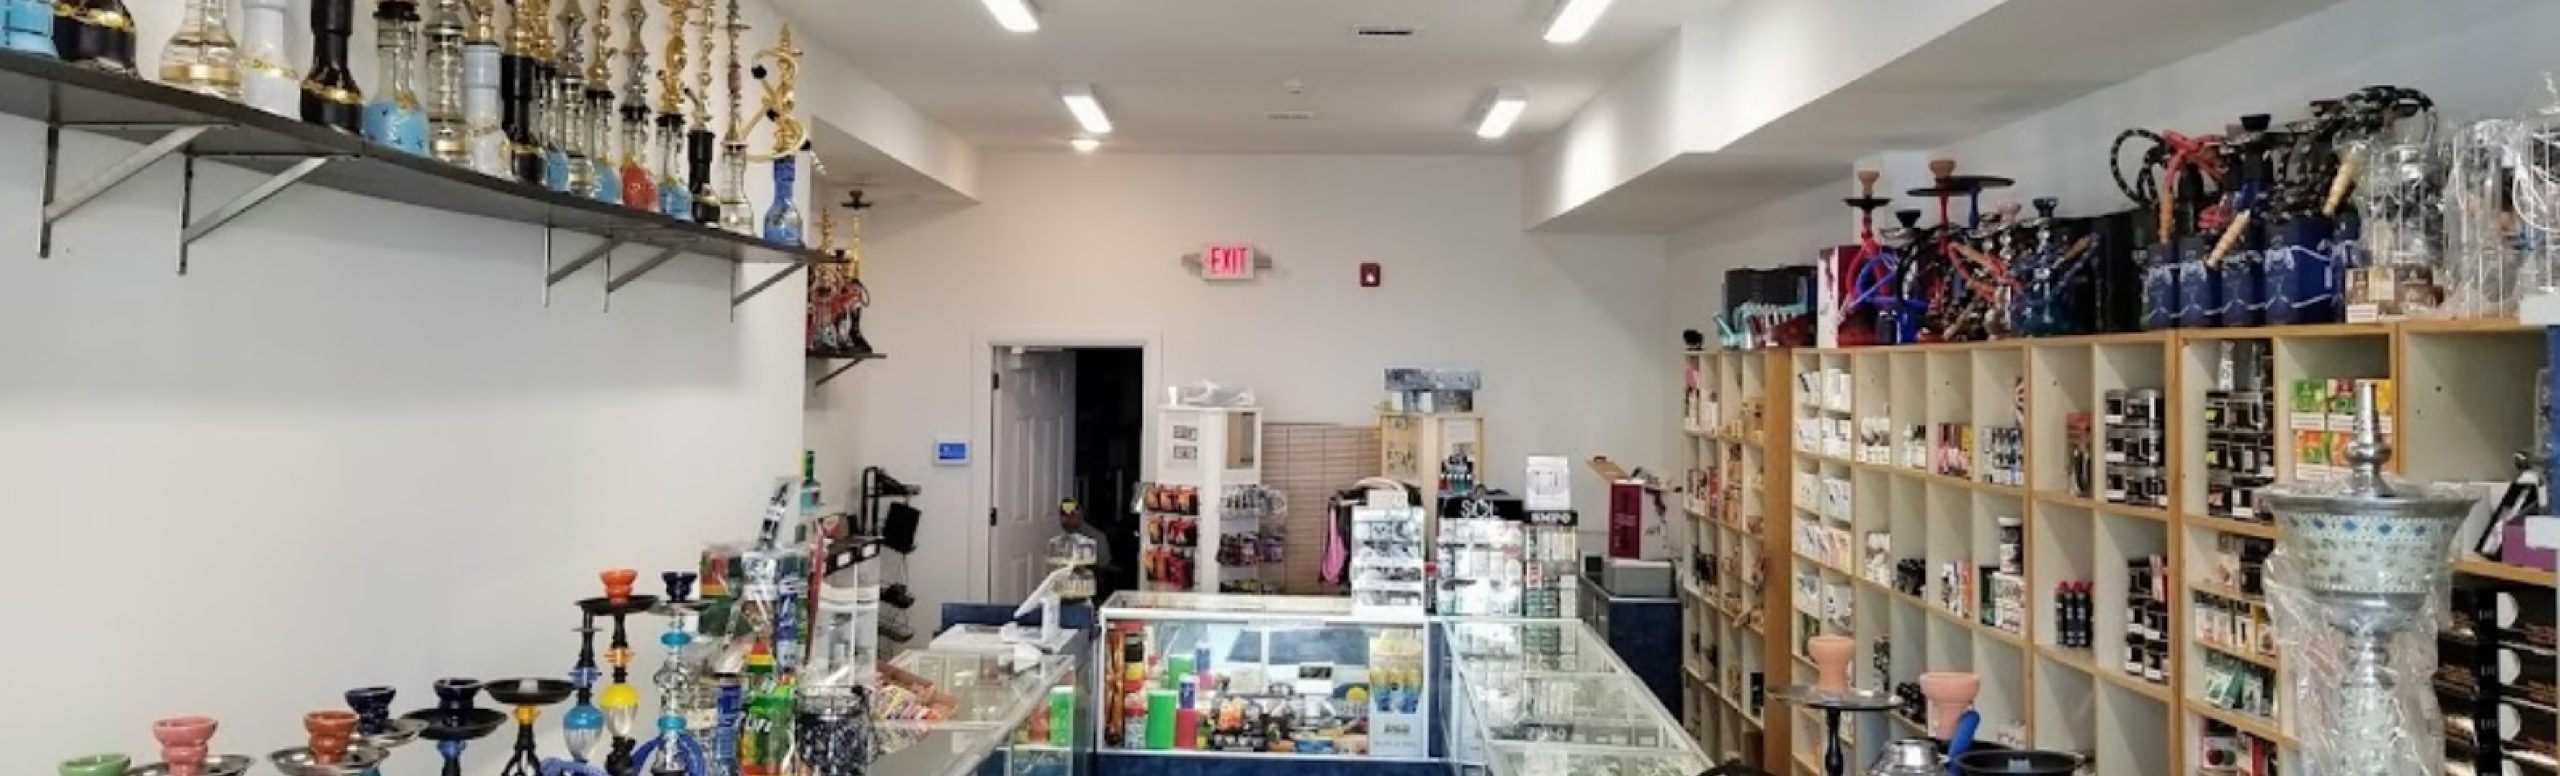 image of my smoke shop in jersey city nj